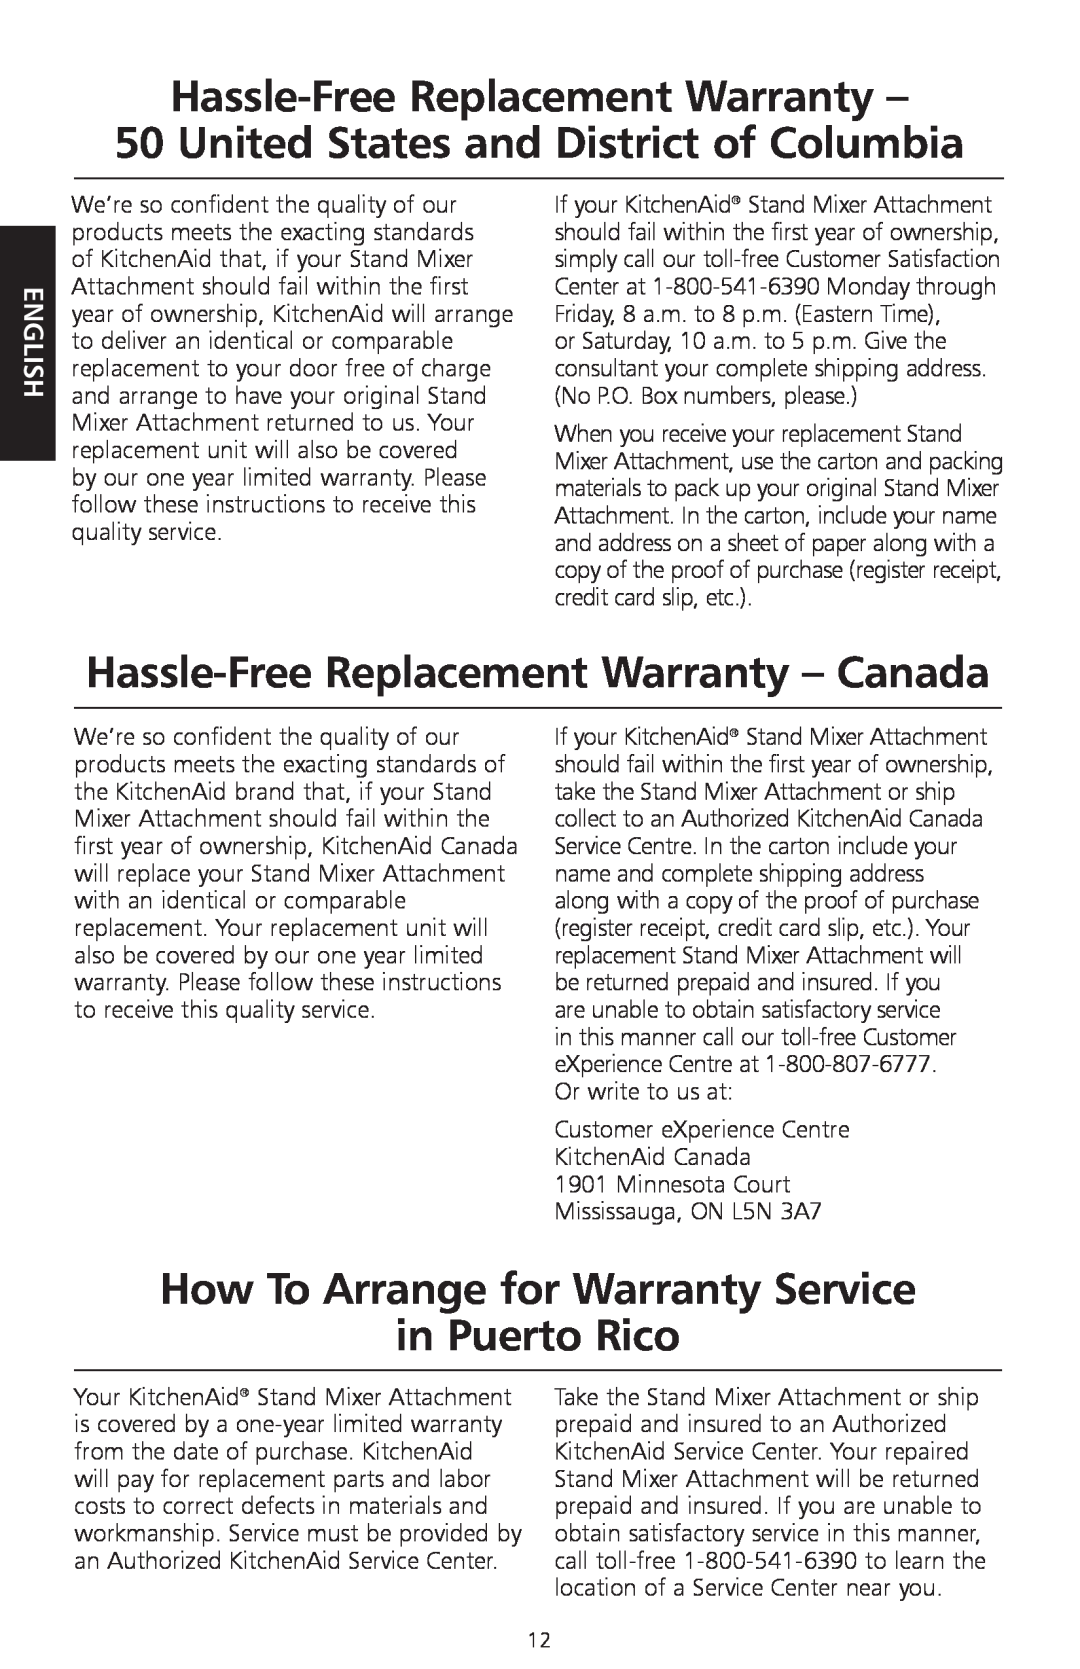 KitchenAid KPEX manual Hassle-Free Replacement Warranty, United States and District of Columbia, English 